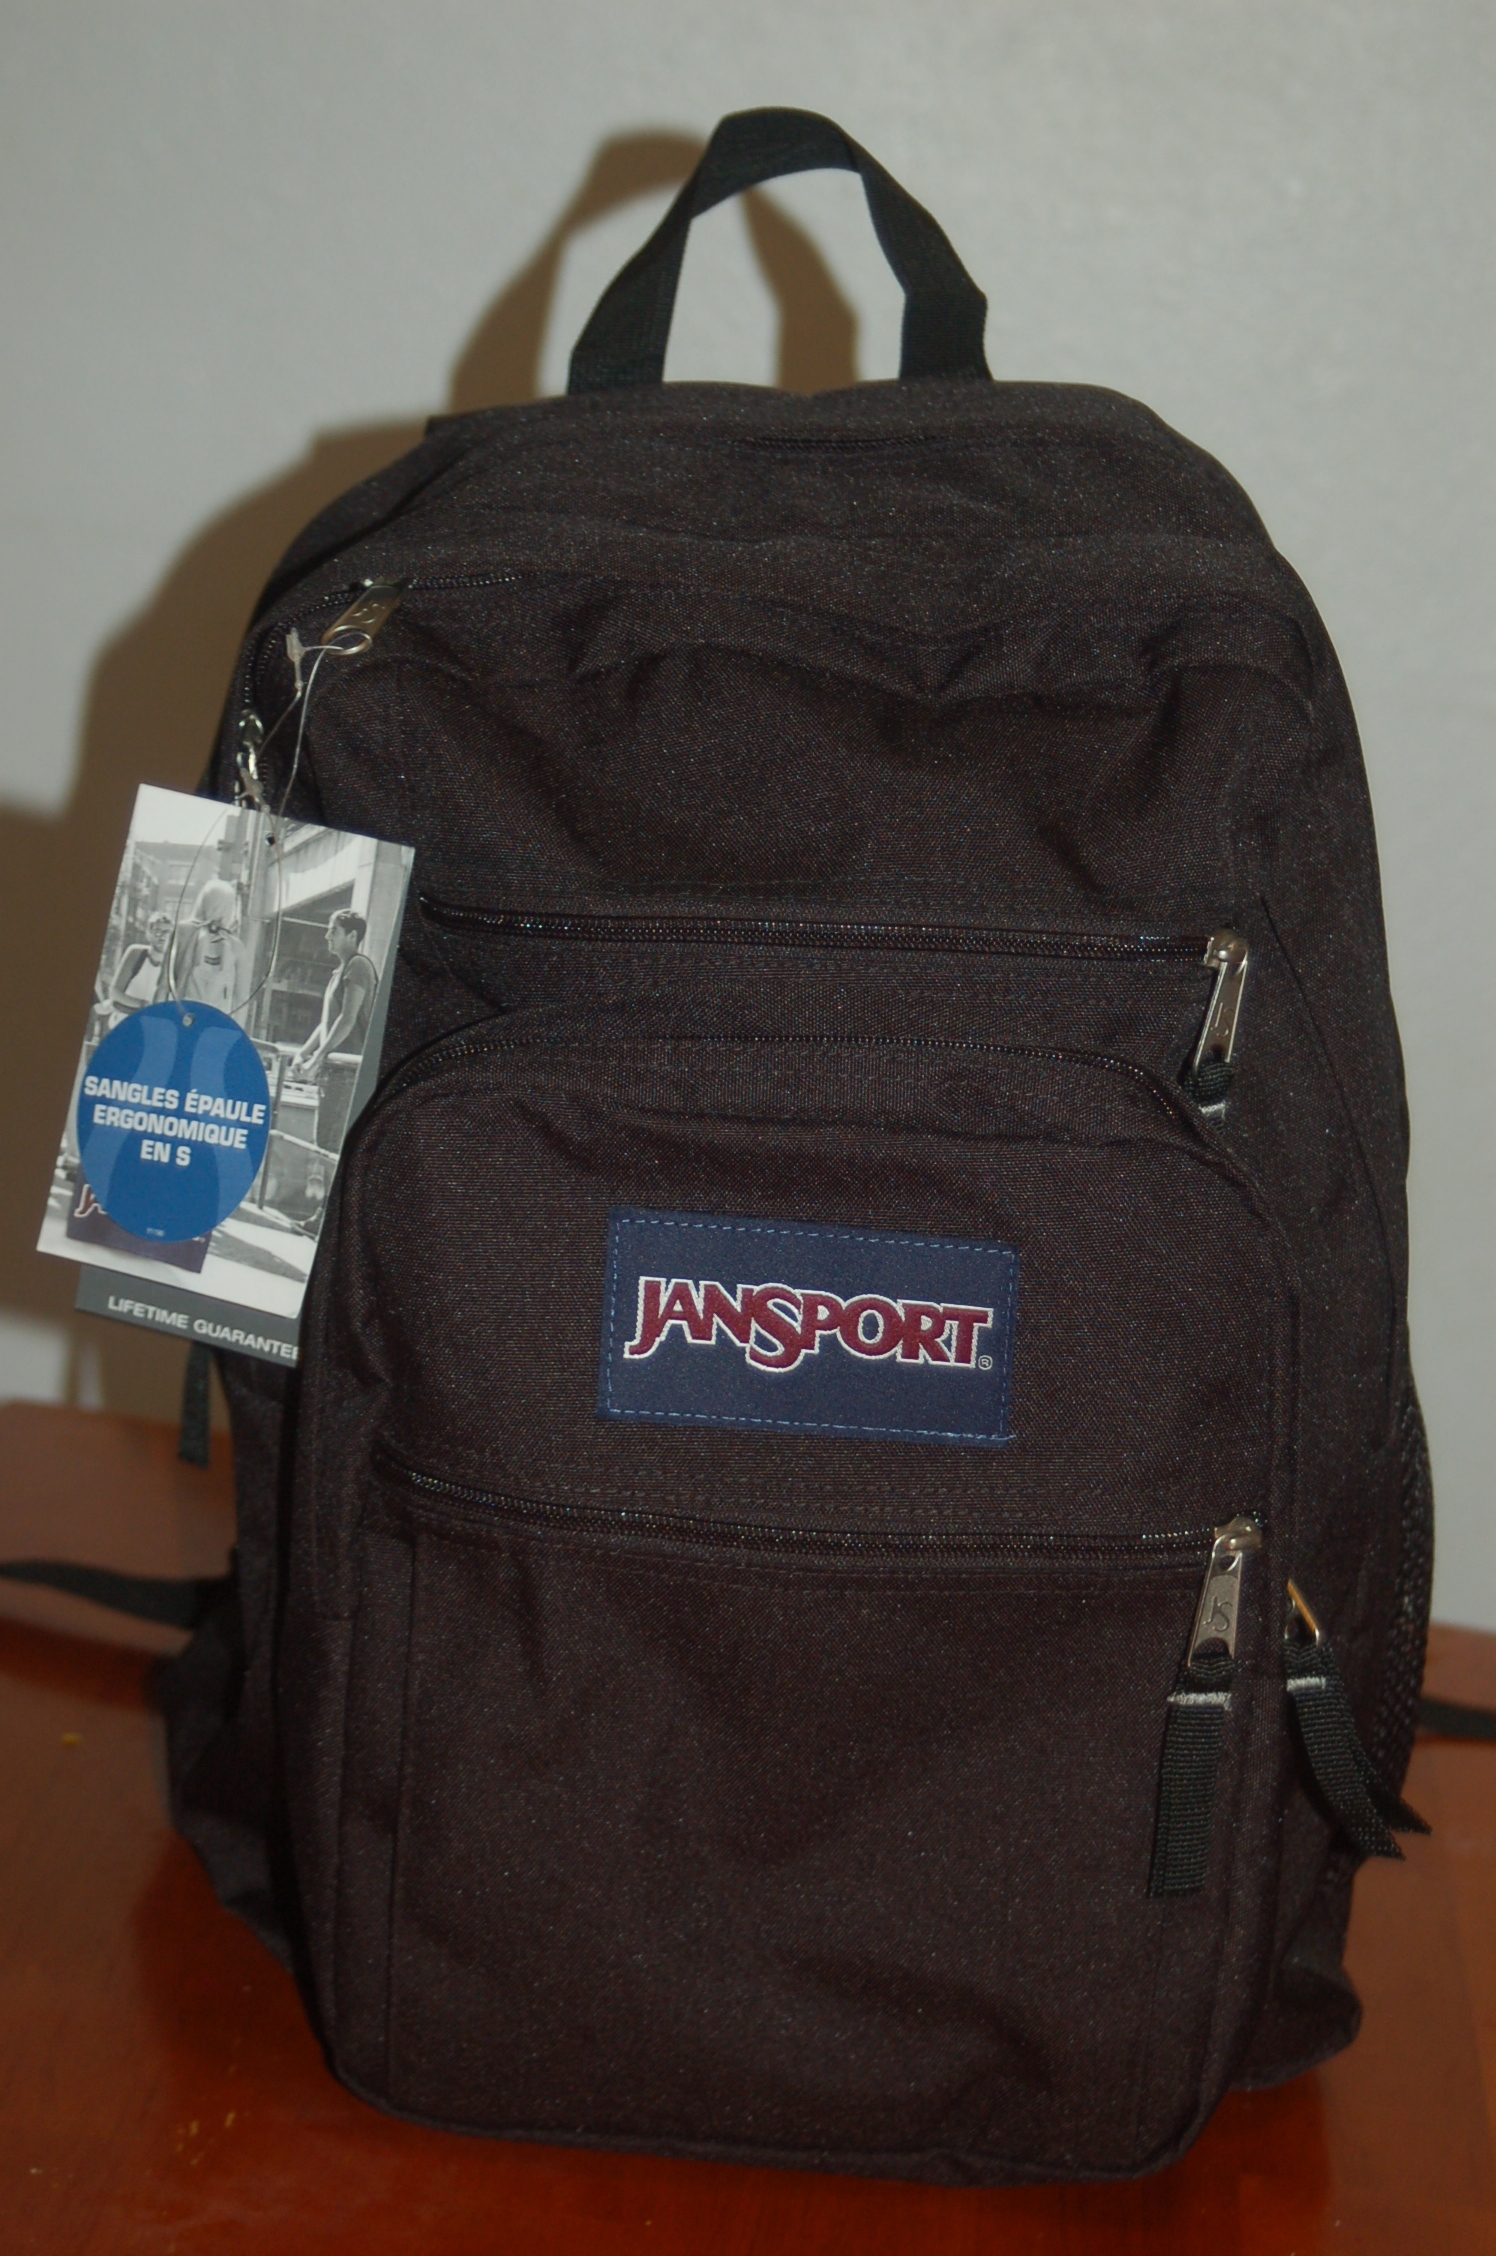 Jansport Back to School Bookbag & French Toast Uniforms from @IUNIFORMS ...